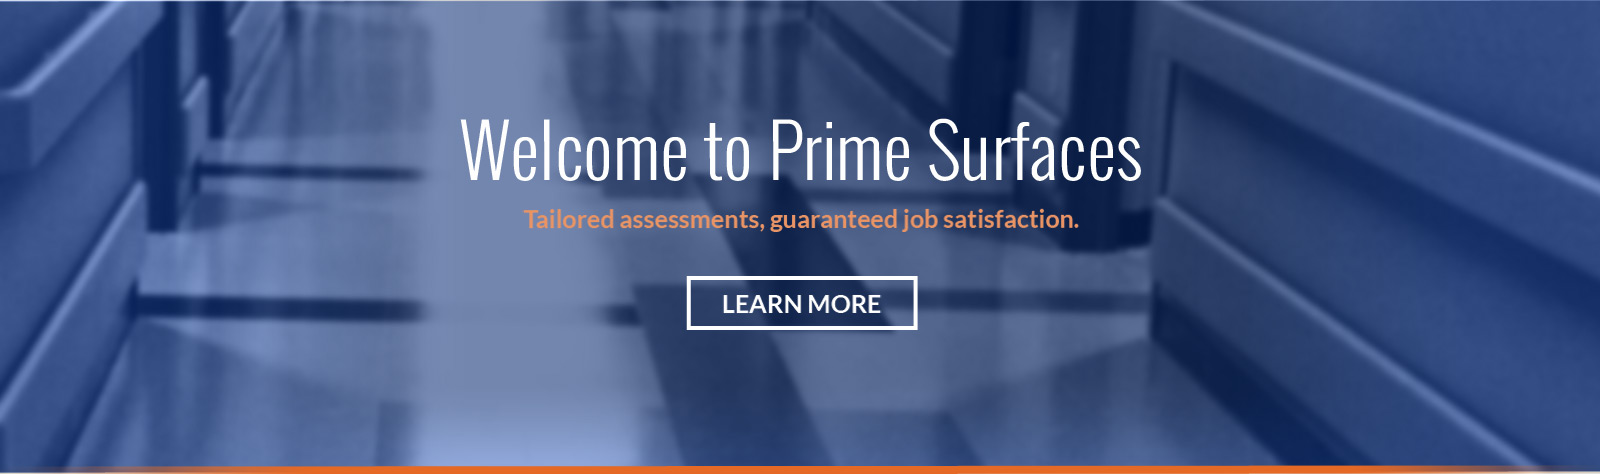 Welcome to Prime Surfaces